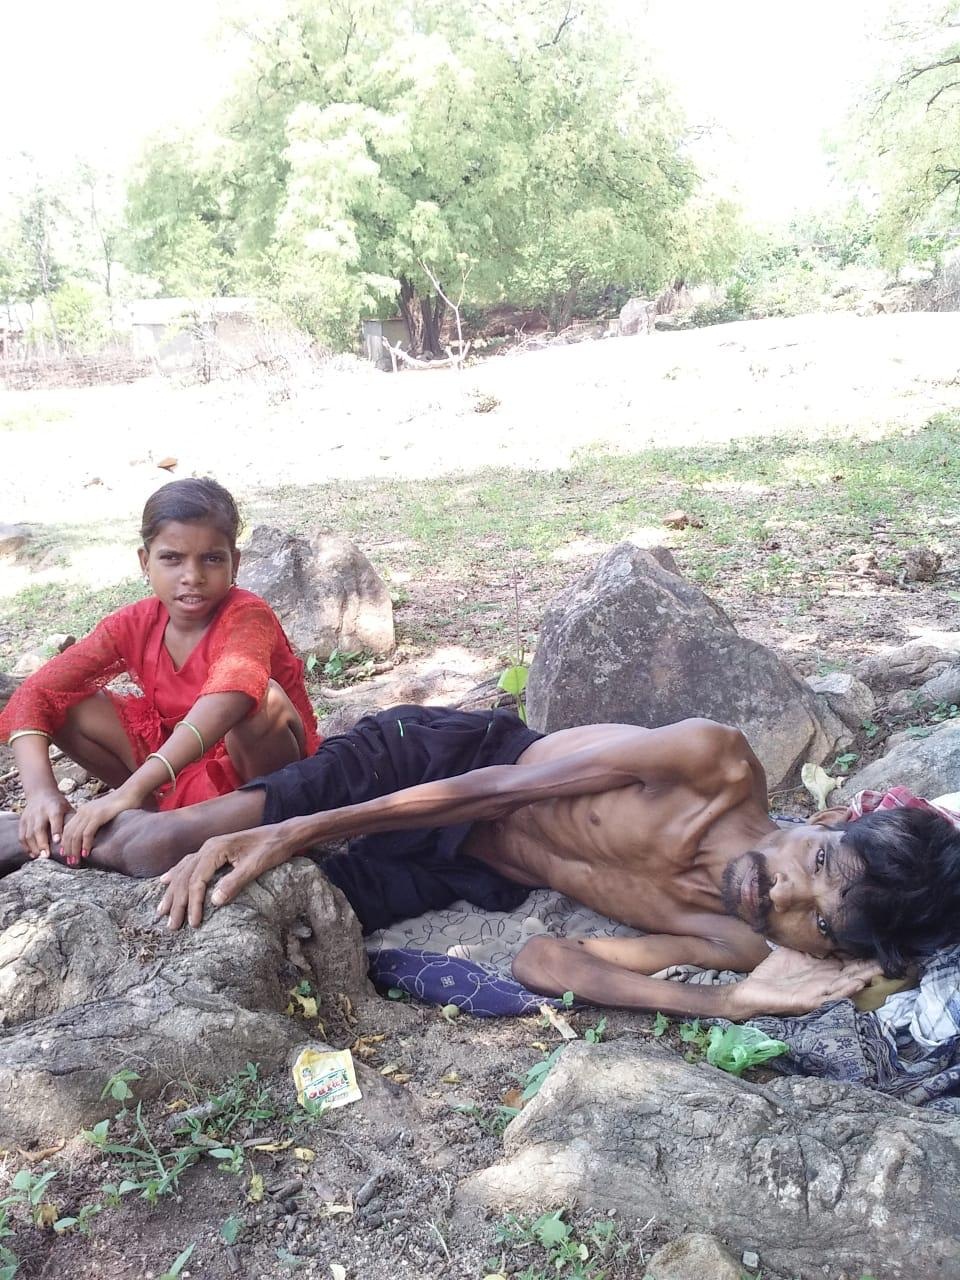 Baidhar and his minor daughter Suchitra taking shelter under a tree, Saturday